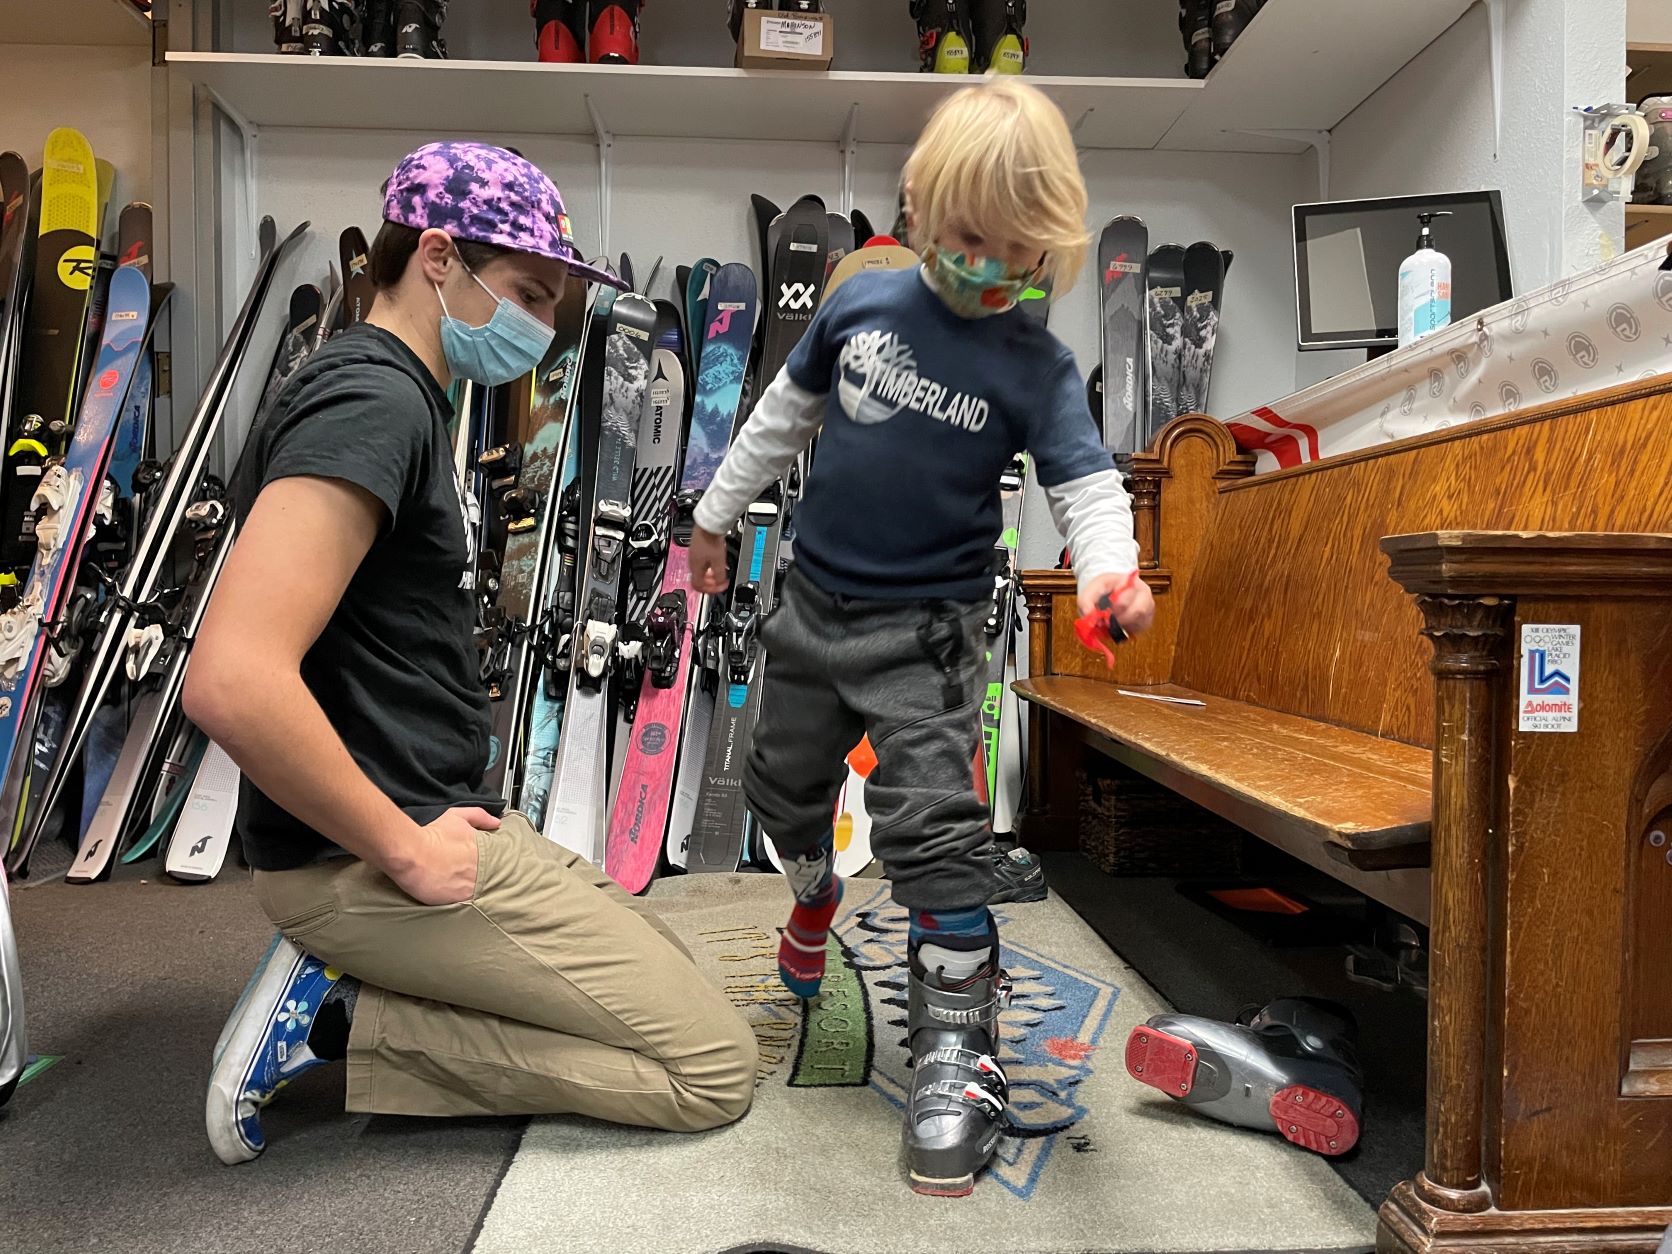 Child trying on ski boot to get properly-fitted for the next size of seasonal lease gear.